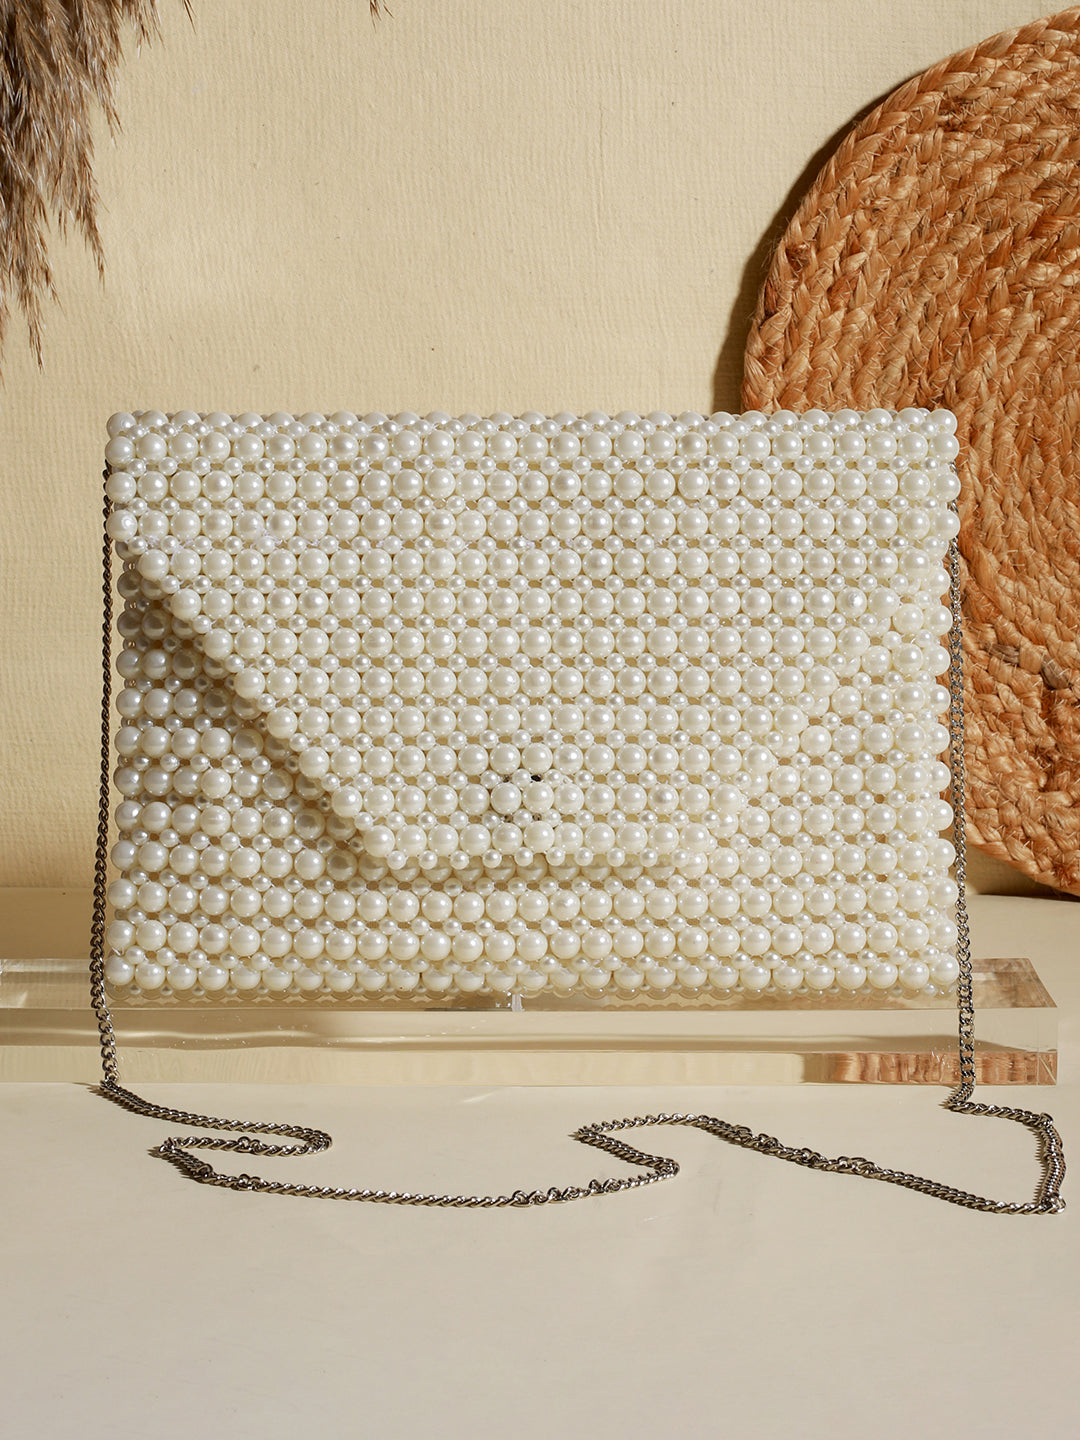 Pearl Perfection Beaded White Sling Bag